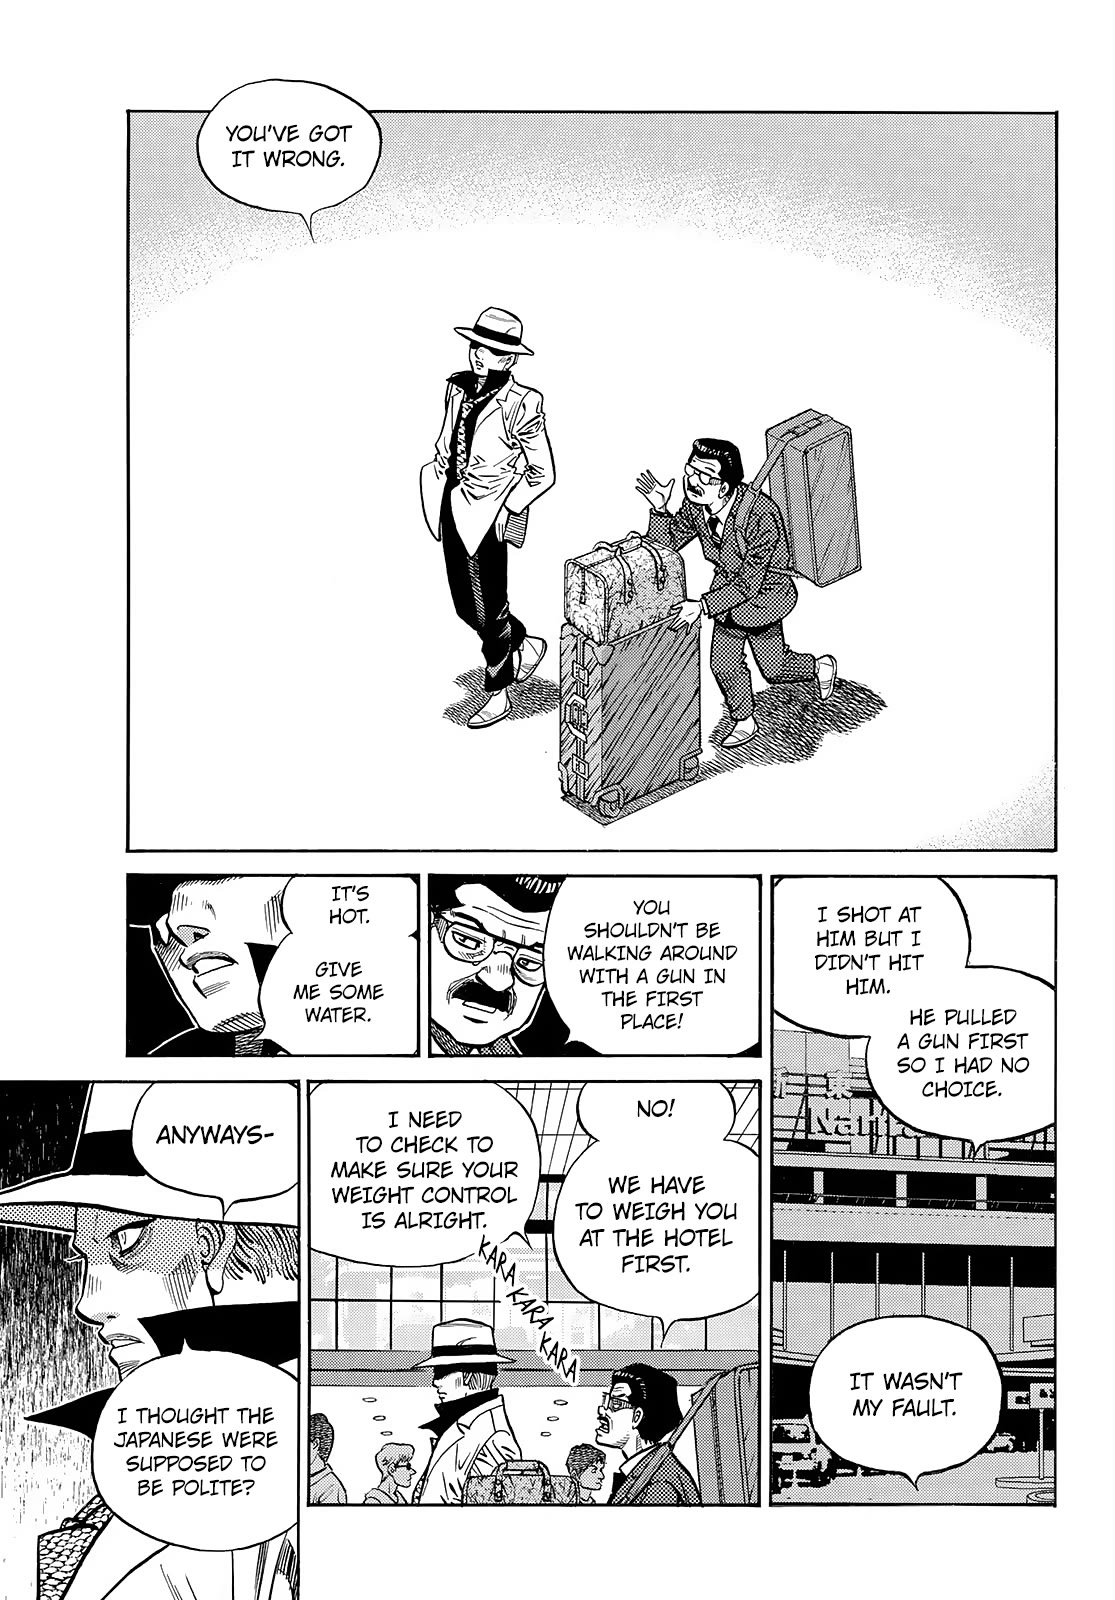 Hajime no Ippo, Chapter 1446 Round 1446 Rosario Arrives in Japan image 06